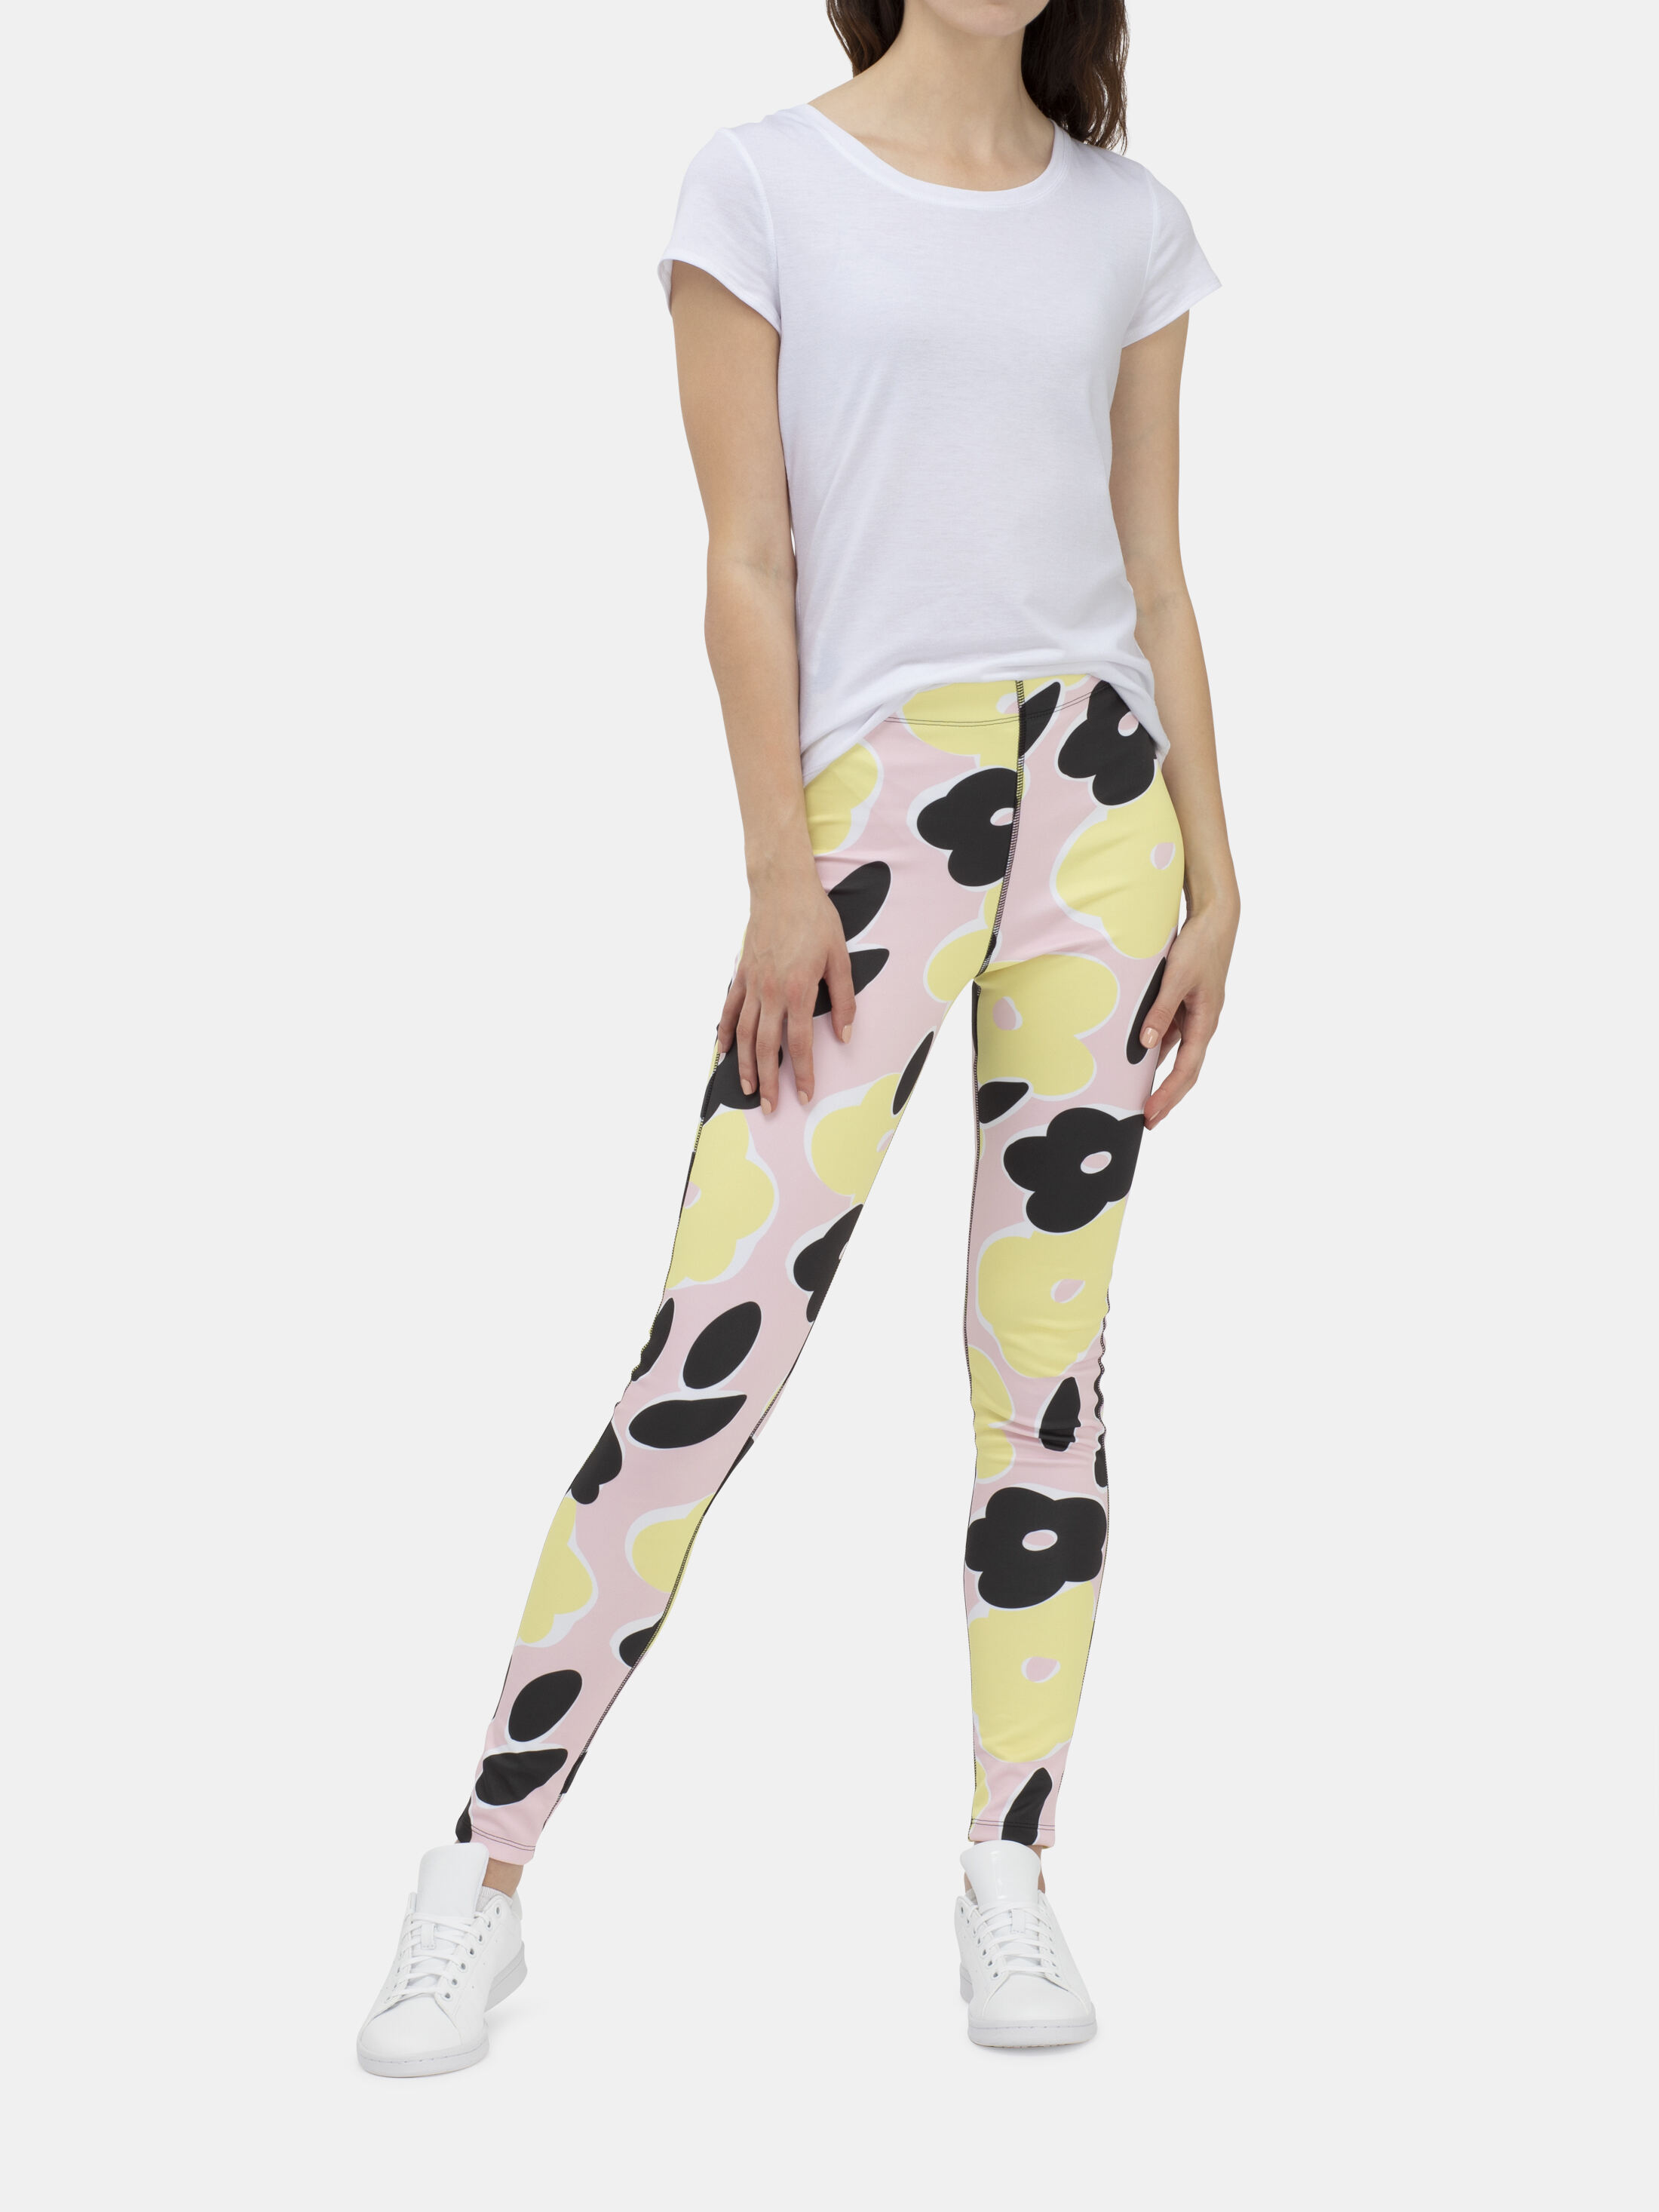 What should teens know about leggings? - Quora